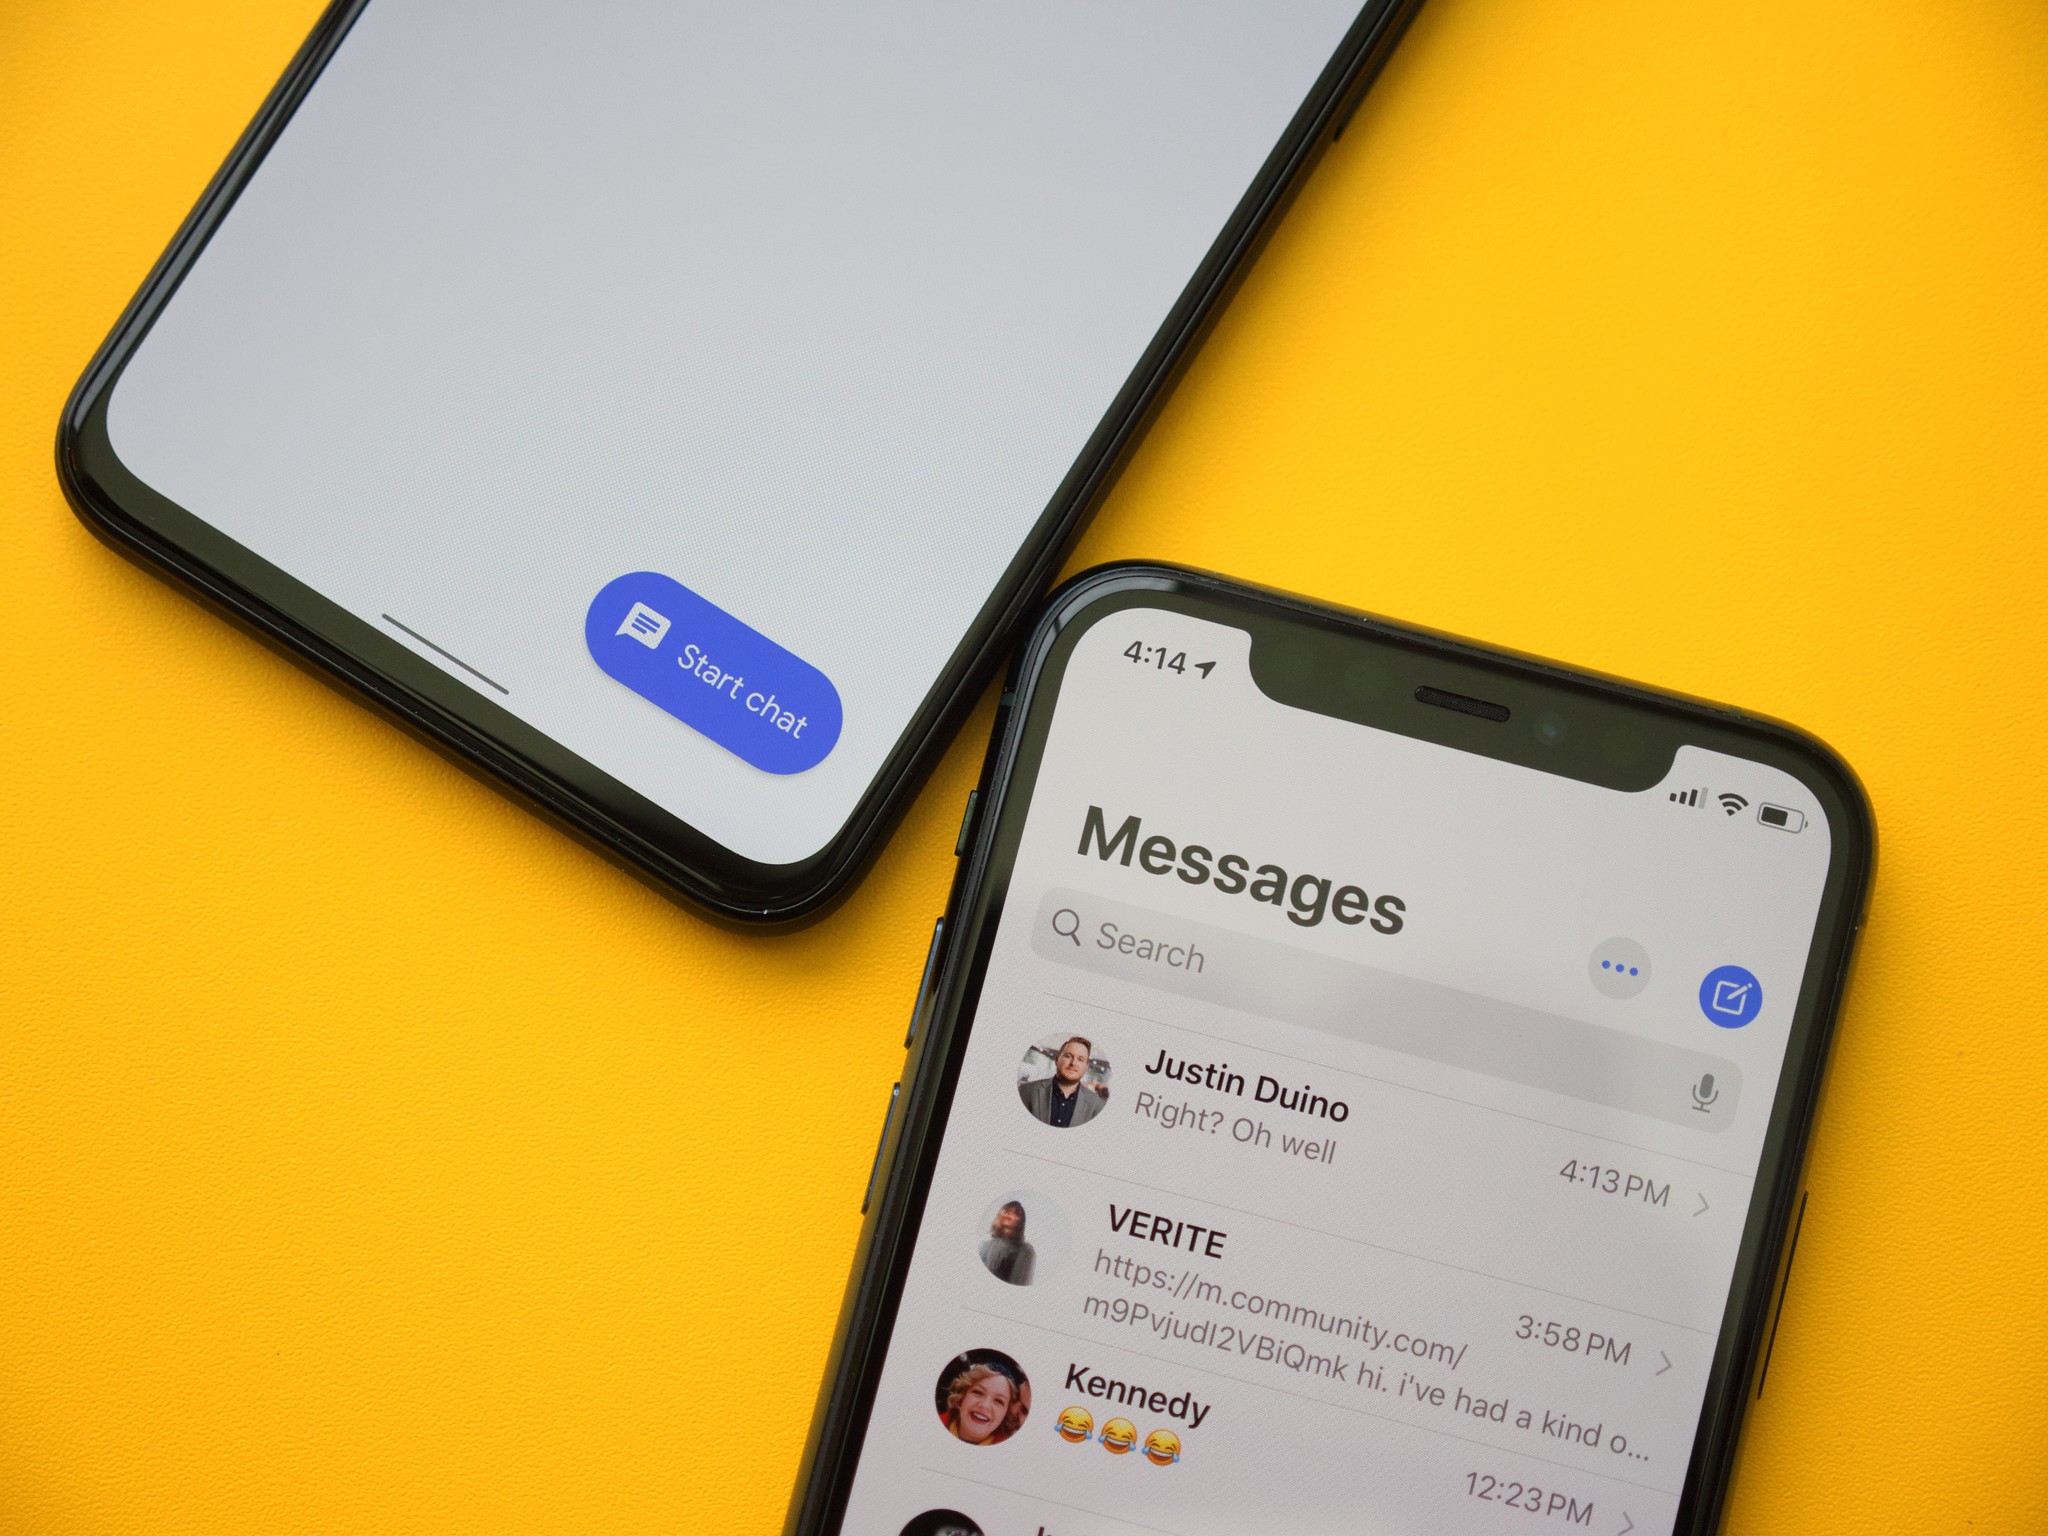 Google Messages and iMessage